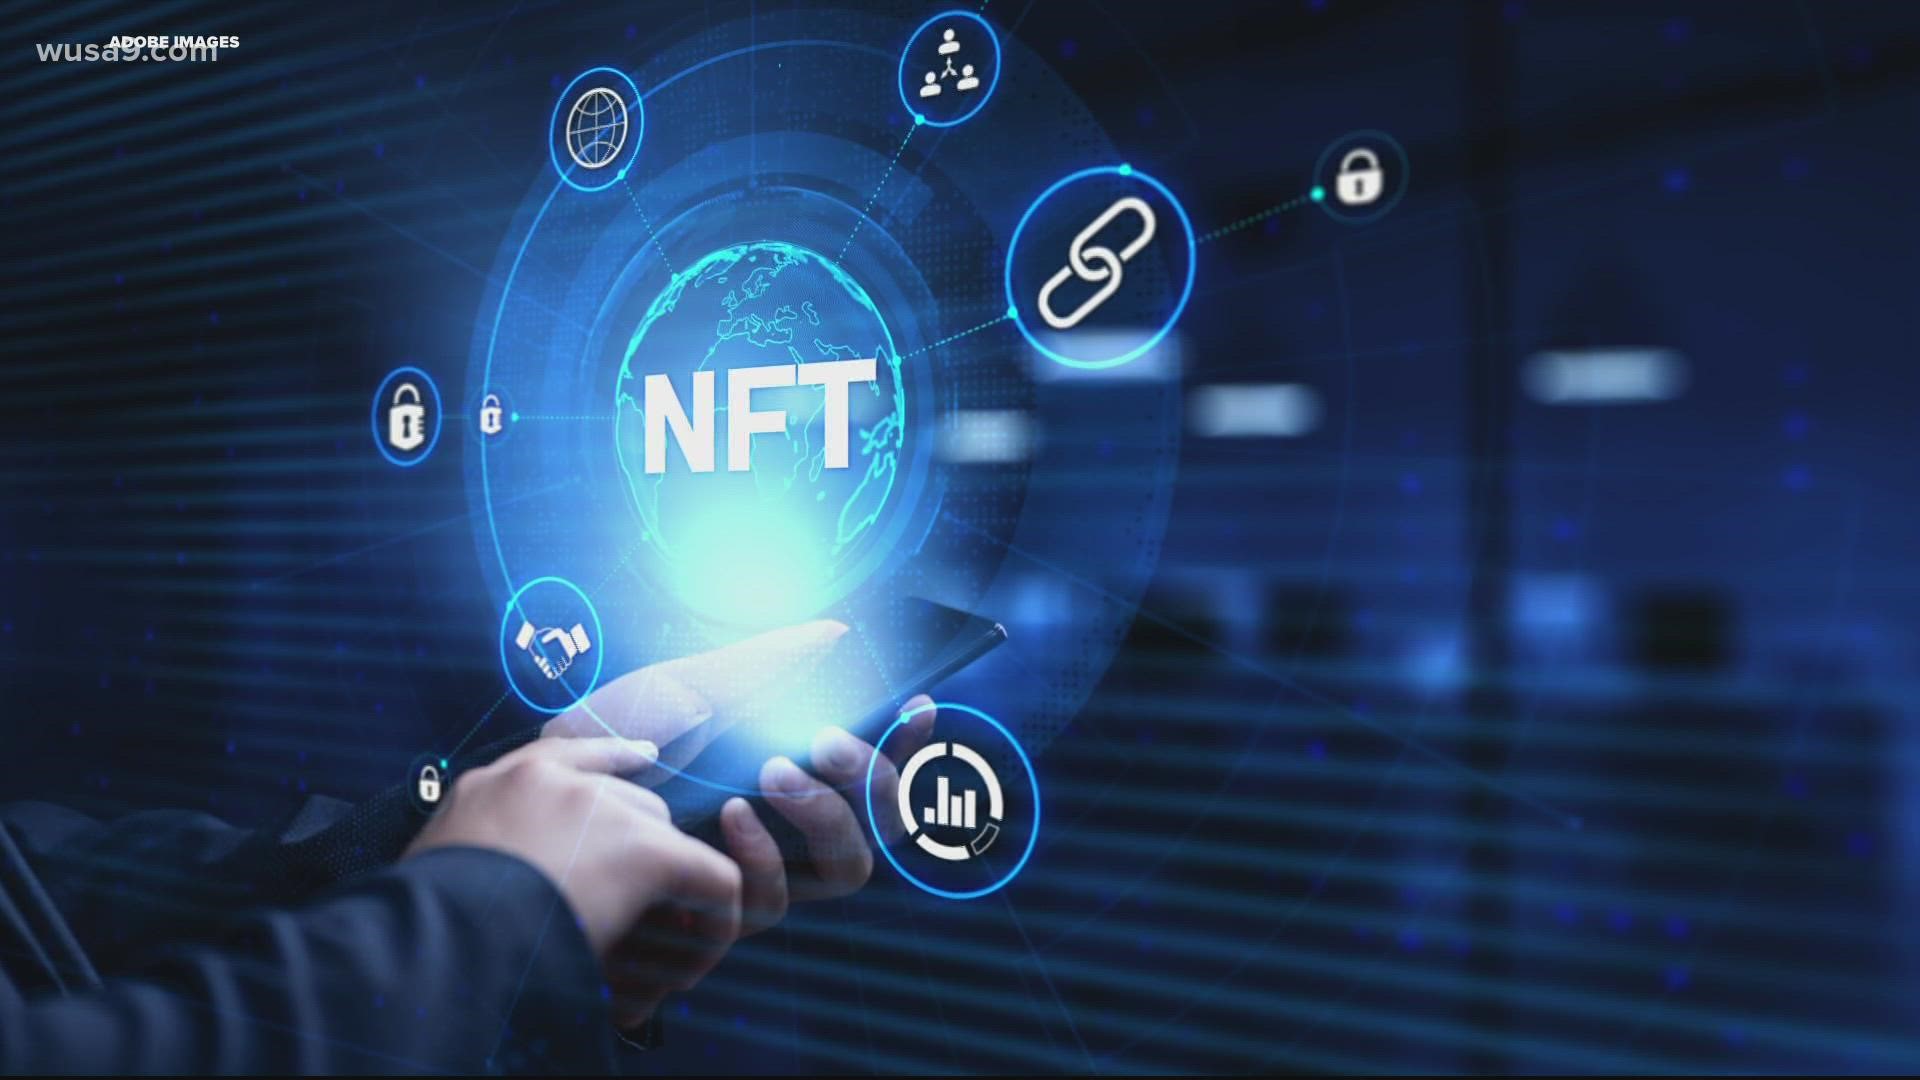 WUSA9 verifies if digital assets such as non-fungible tokens (NFT) can be taxed.